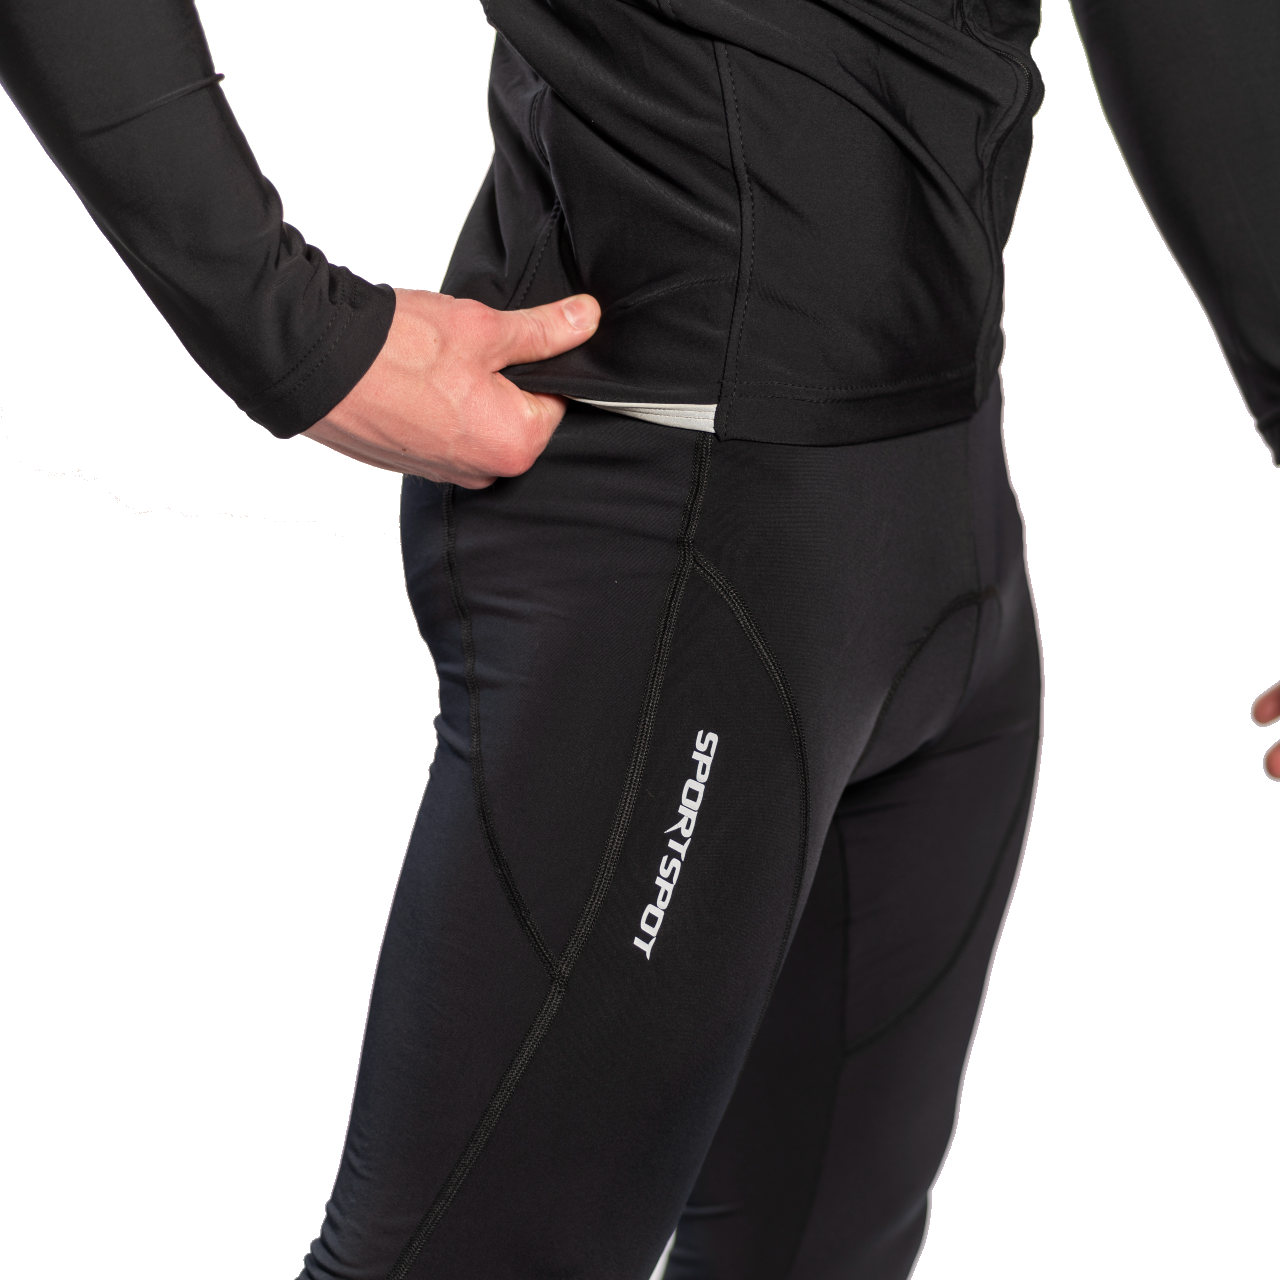 Sportspot Sportspot Men Tights | – for Tights | Bicycle Bicycling LLC Padded